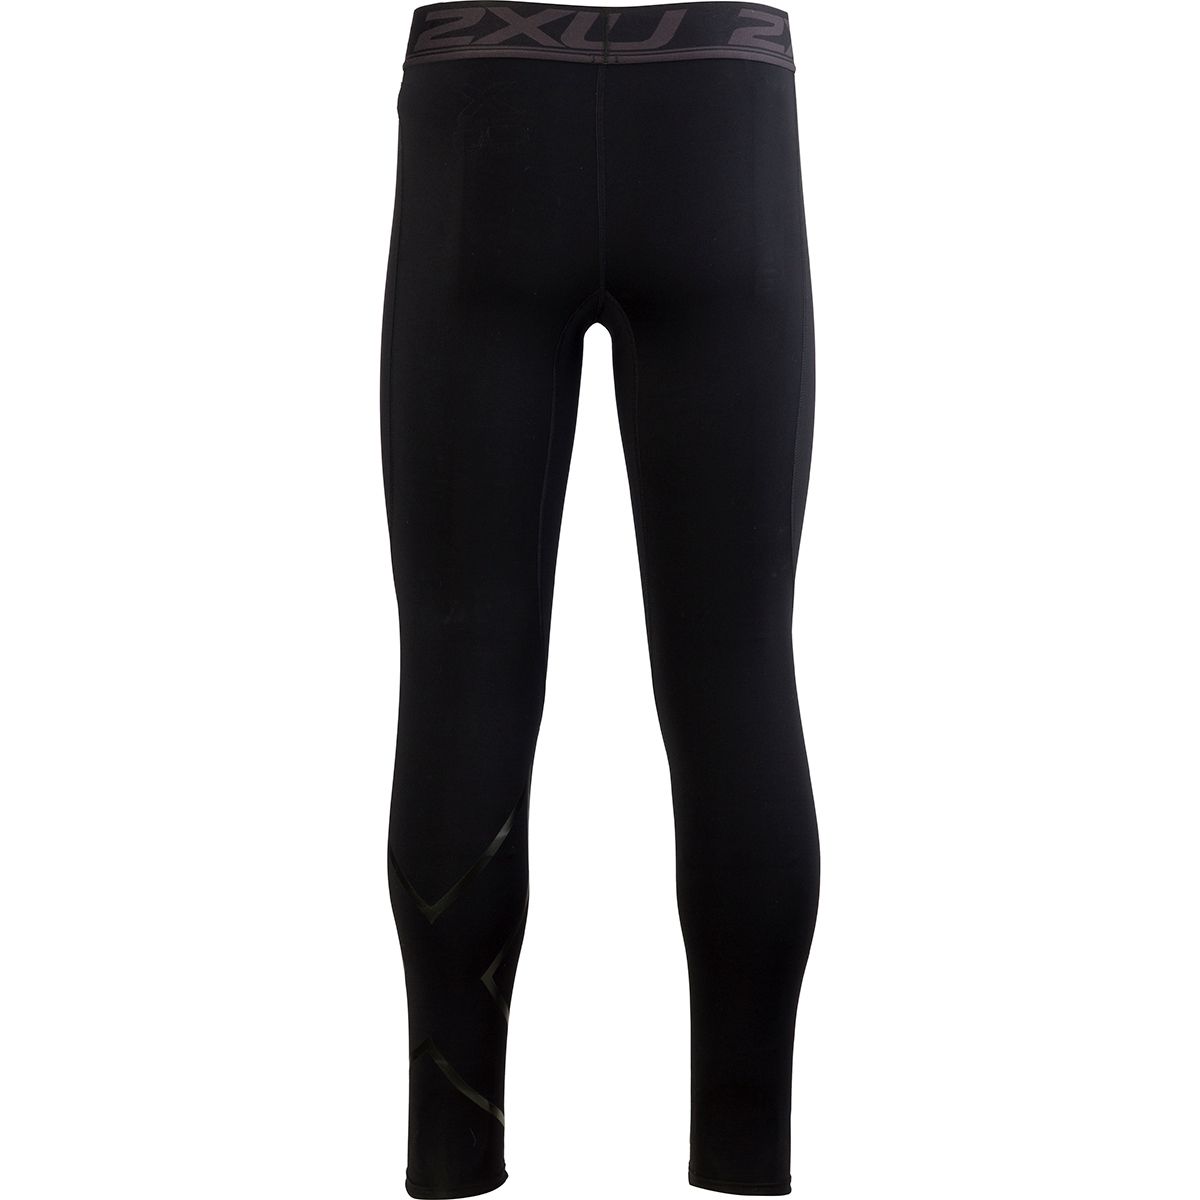 2XU THERMAL COMPRESSION TIGHTS - Mike's Bike Shop